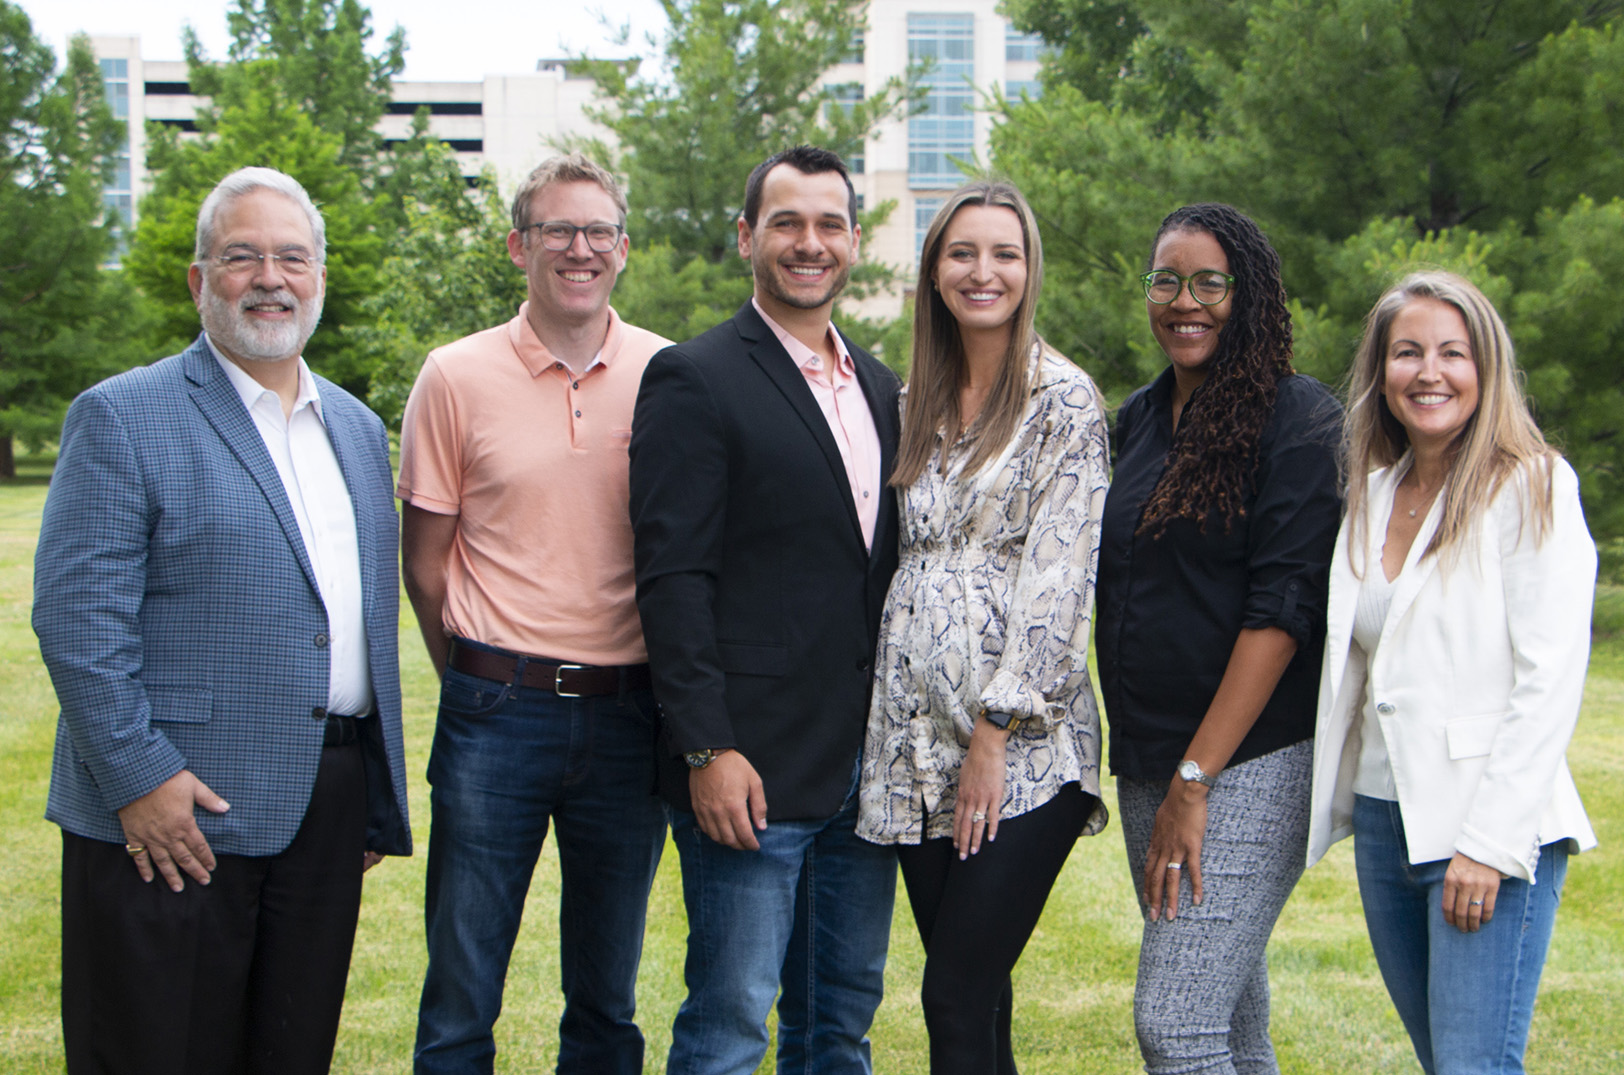 Just funded: Meet the five latest startups scaling their tech, Digital Sandbox KC’s impact 